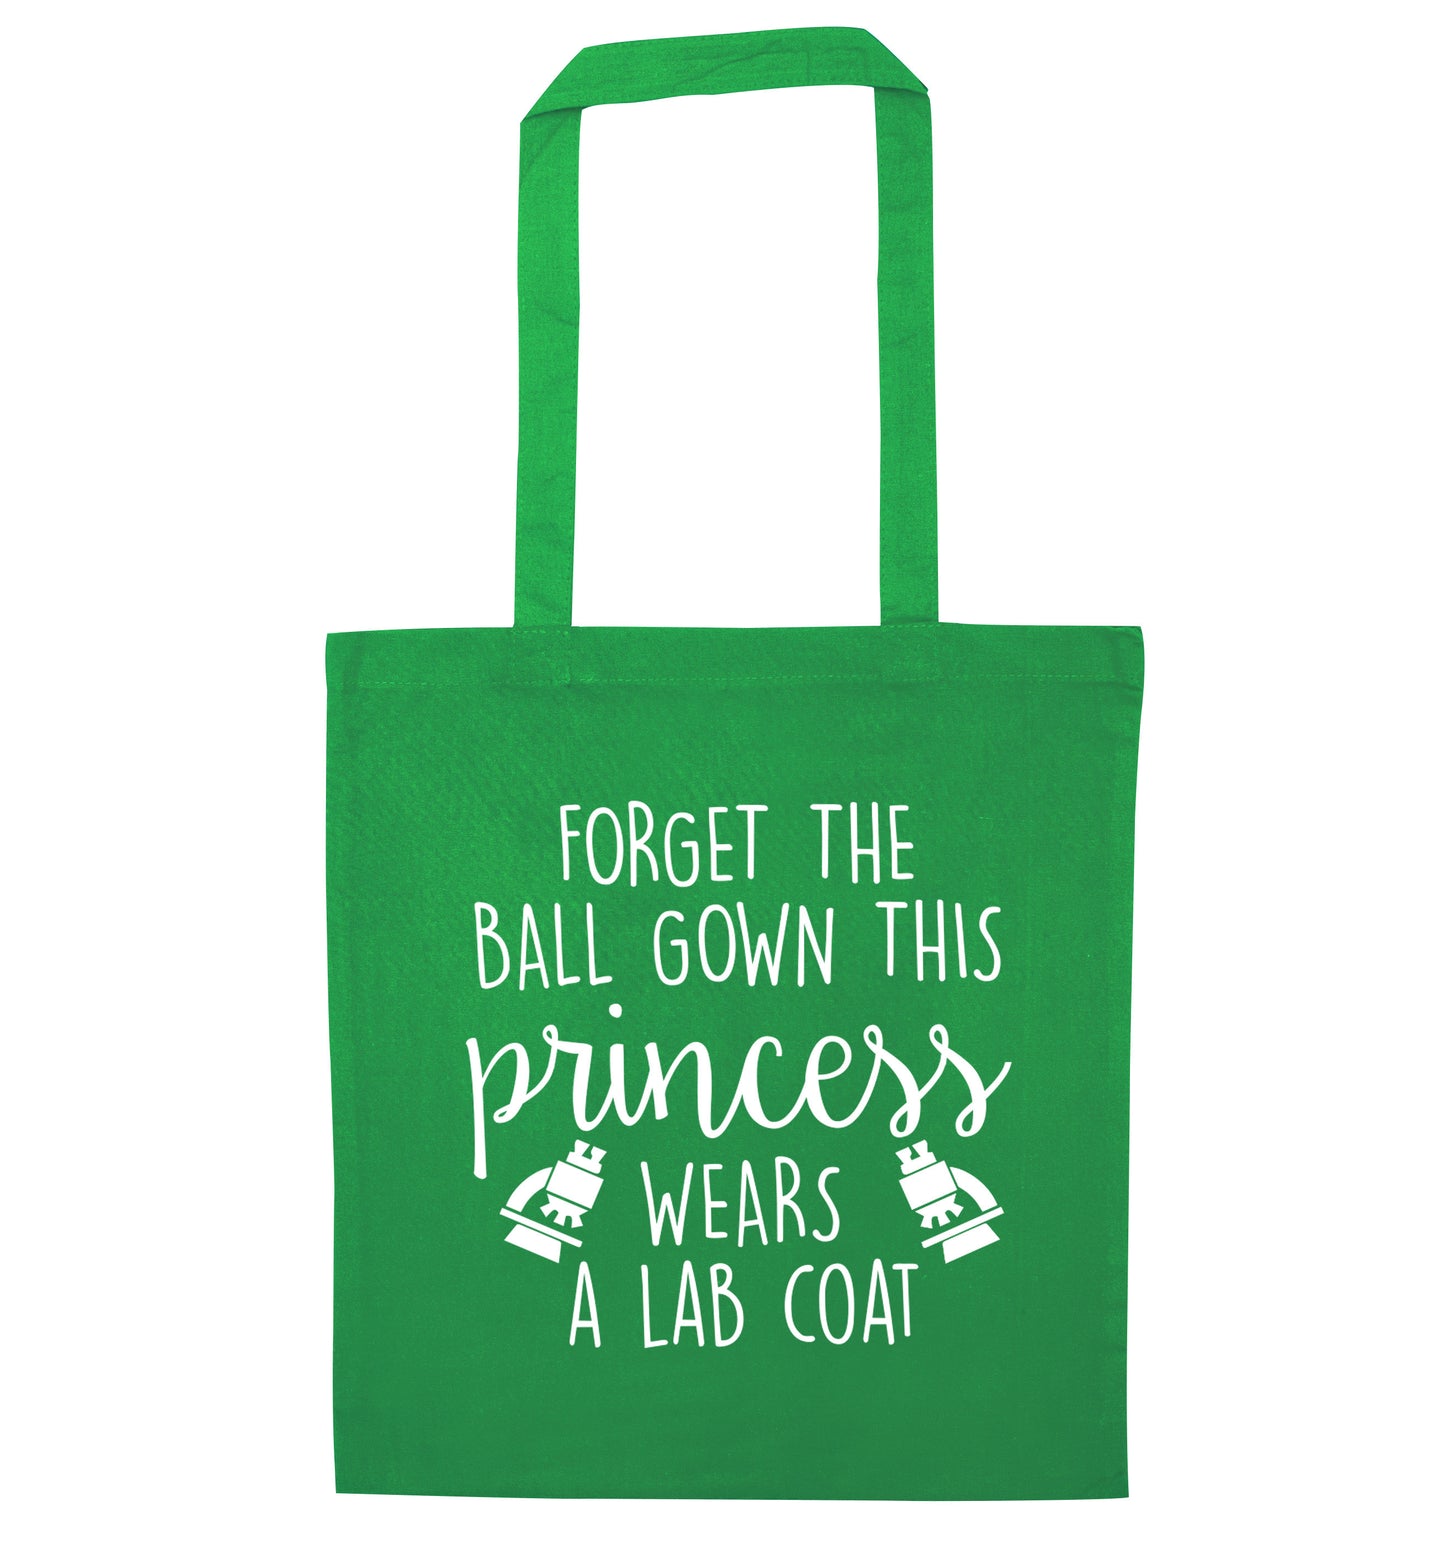 Forget the ball gown this princess wears a lab coat green tote bag